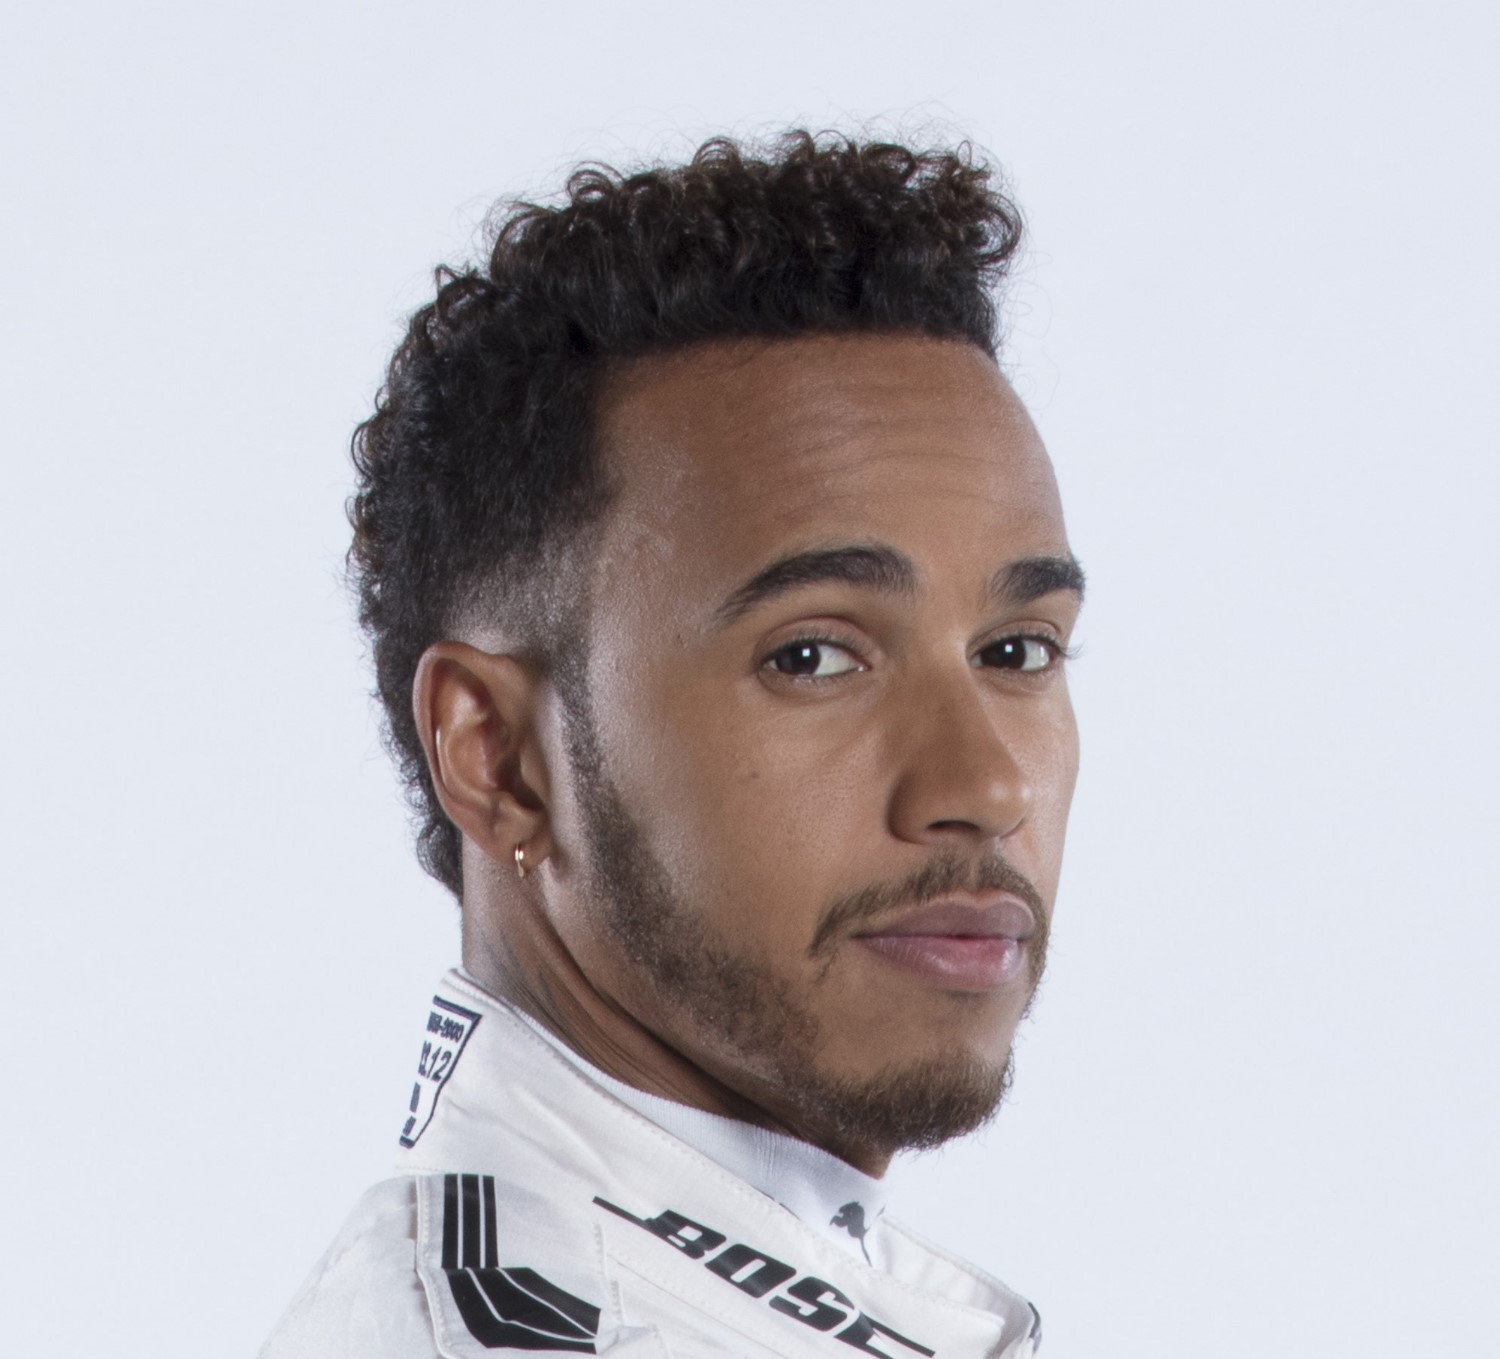 Hamilton still hates Rosberg after getting beat by the German